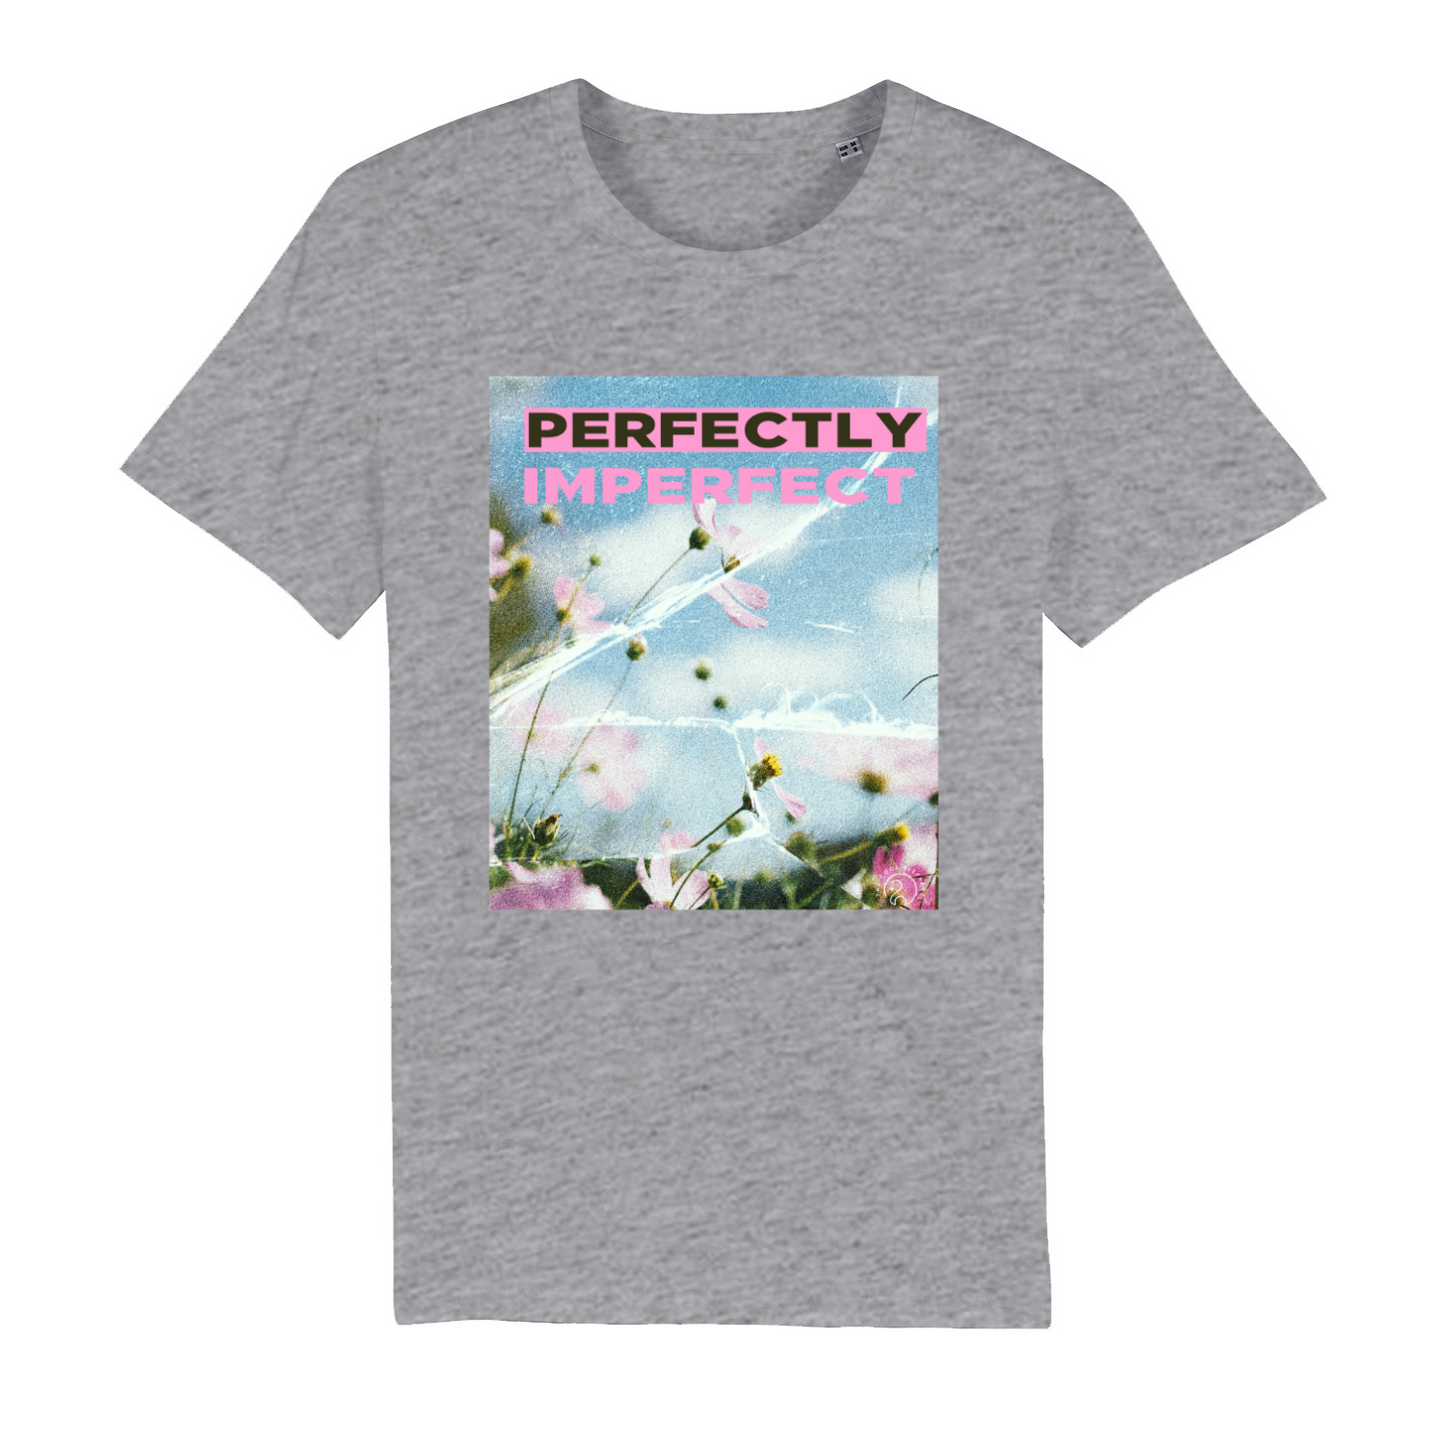 T-Shirt "Perfectly Imperfect"